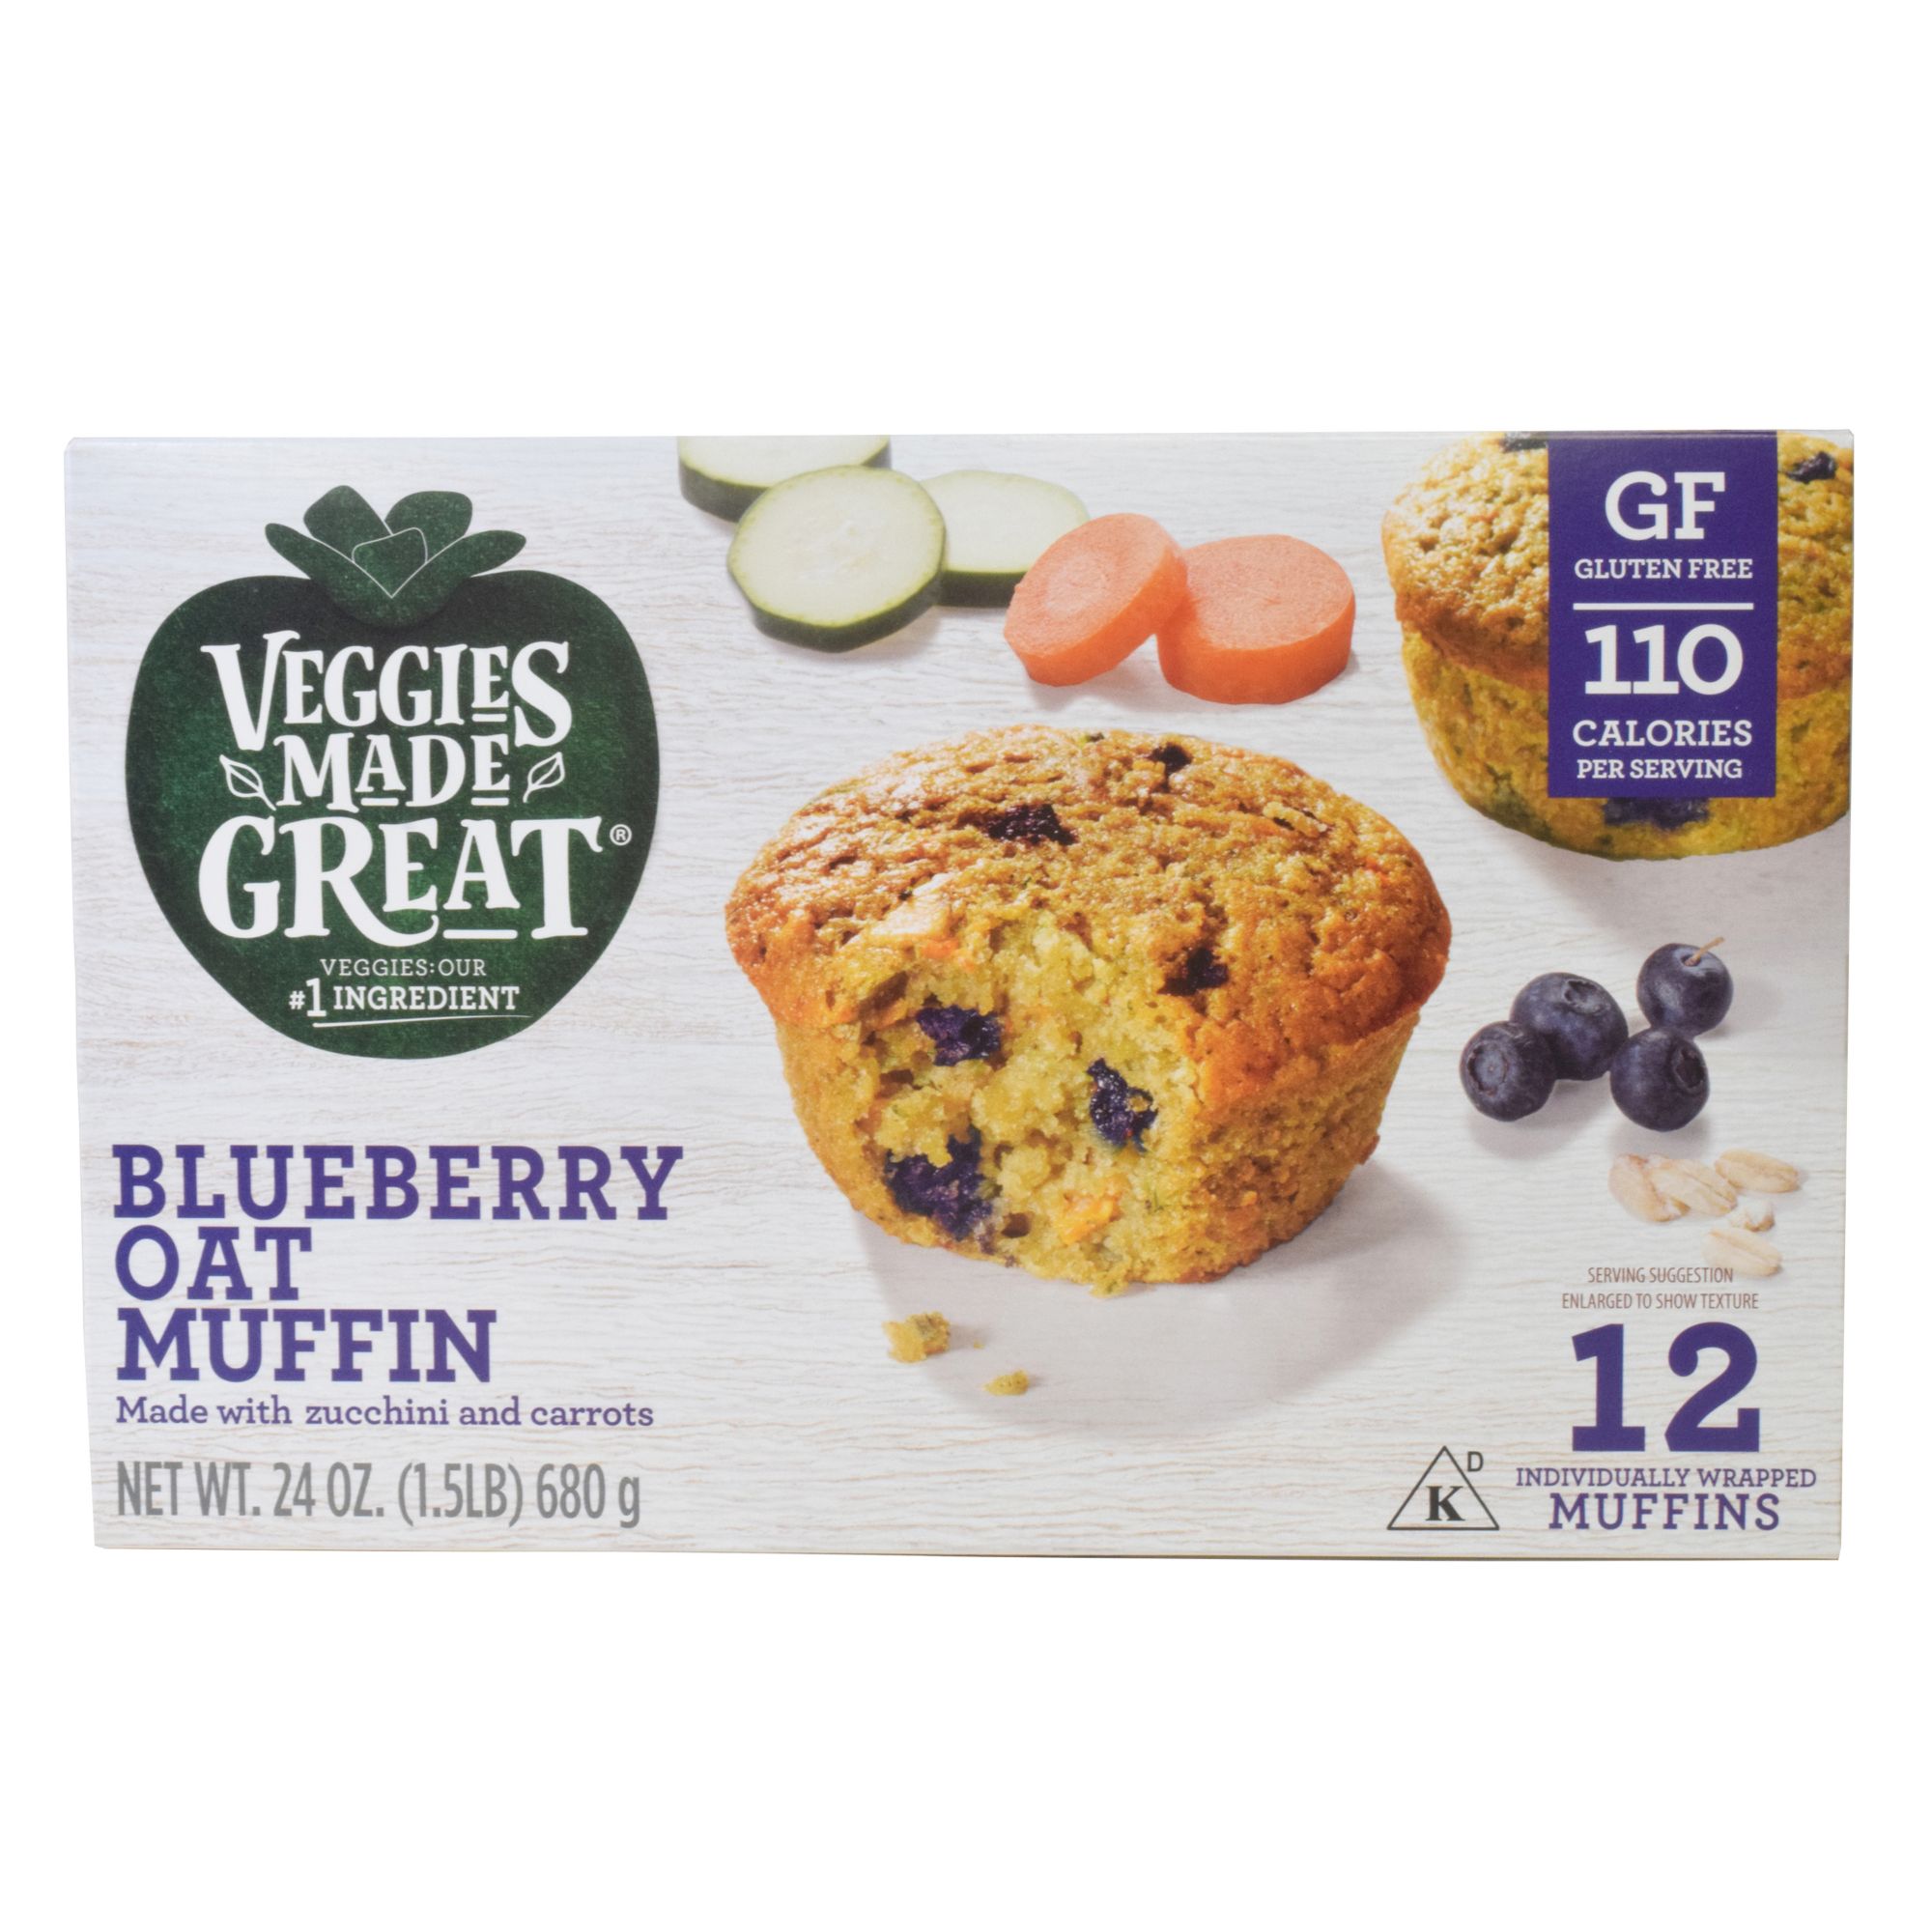 Veggies　Muffin,　Blueberry　Wholesale　BJ's　Oat　Club　12　ct　Made　Great